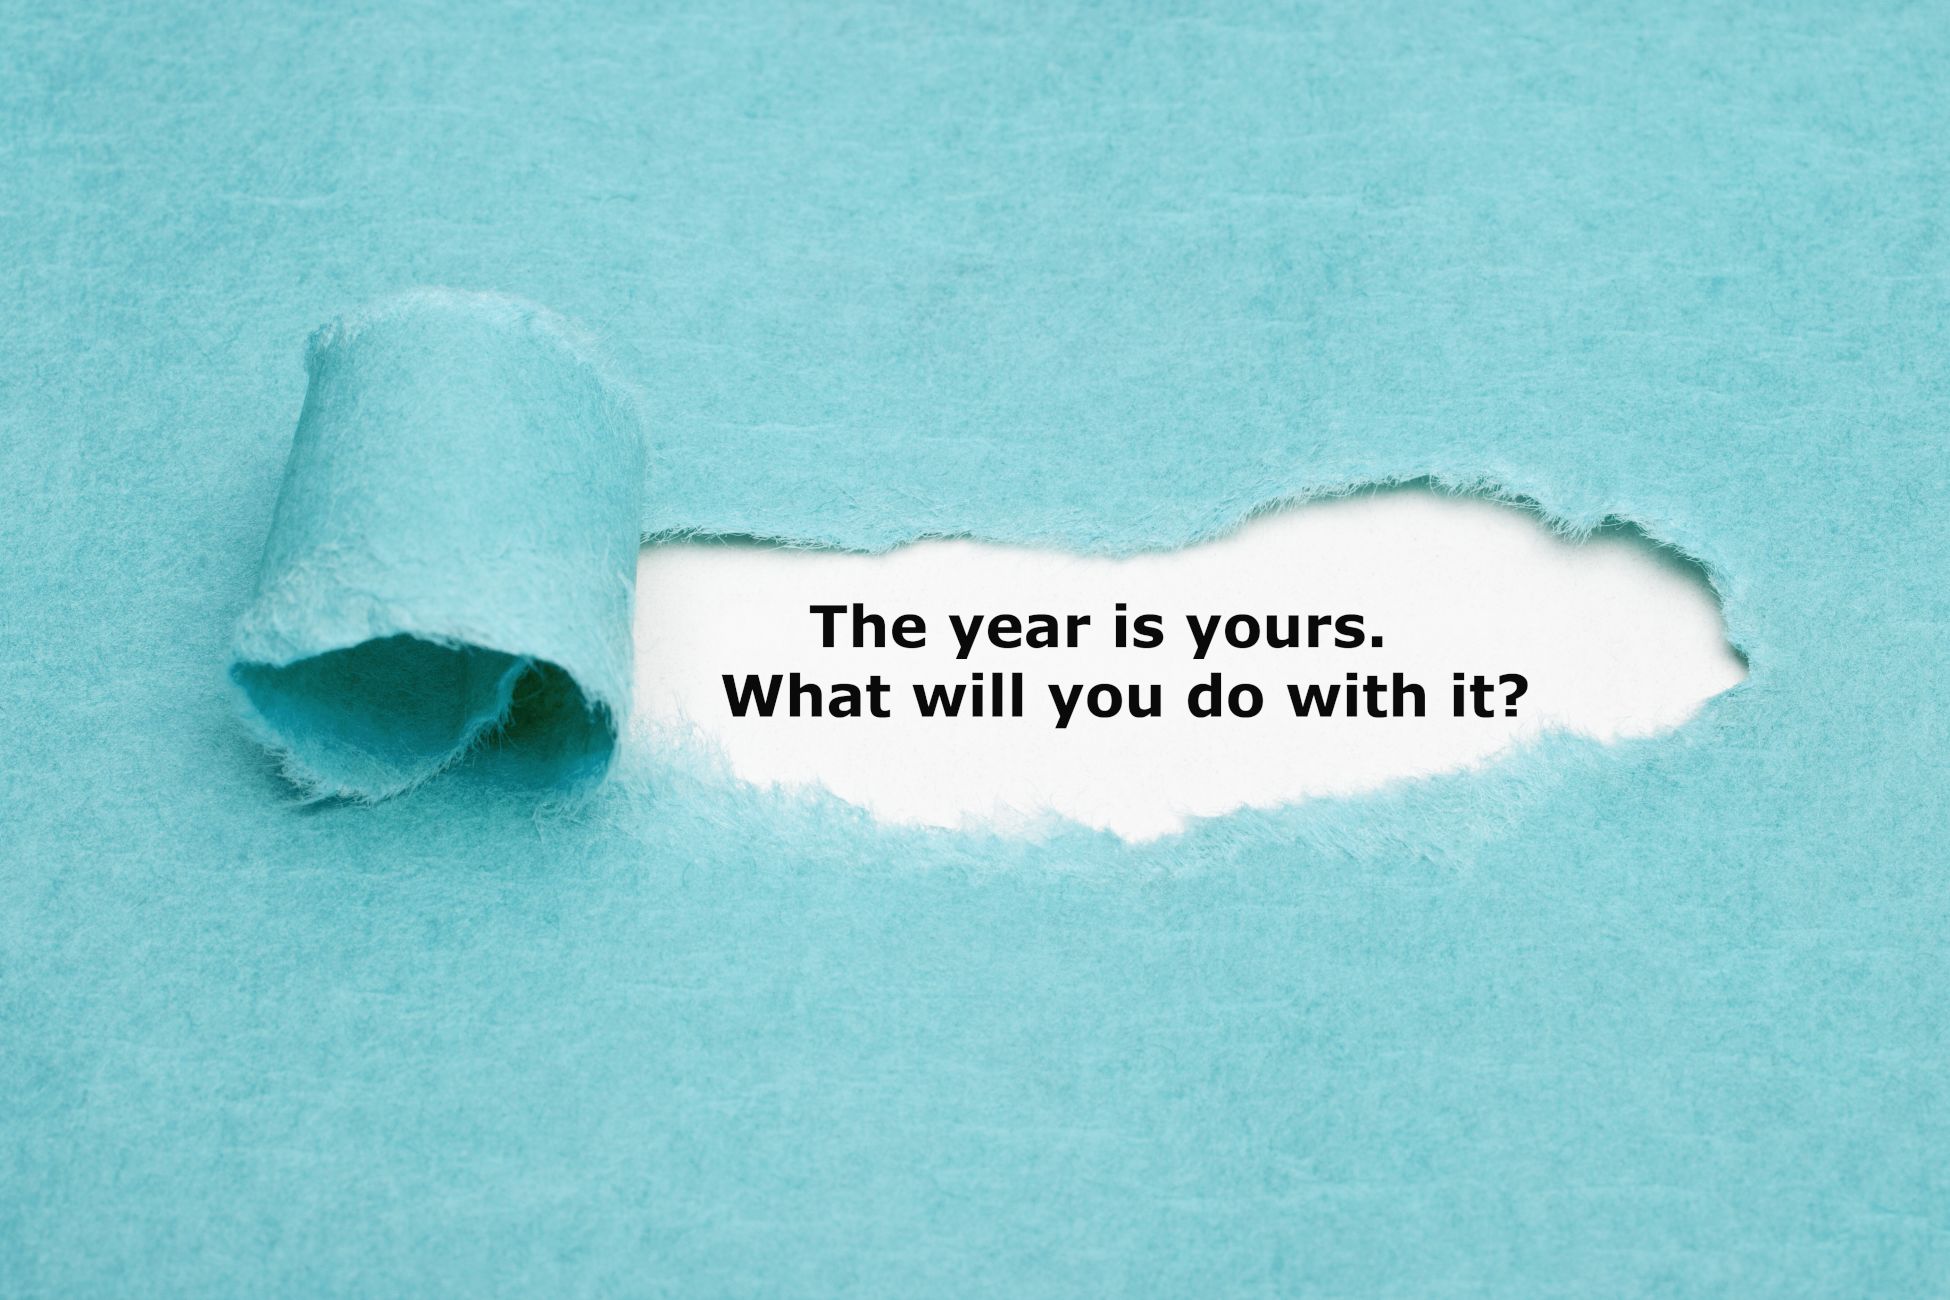 The Year Is Yours What Will You Do with it quote